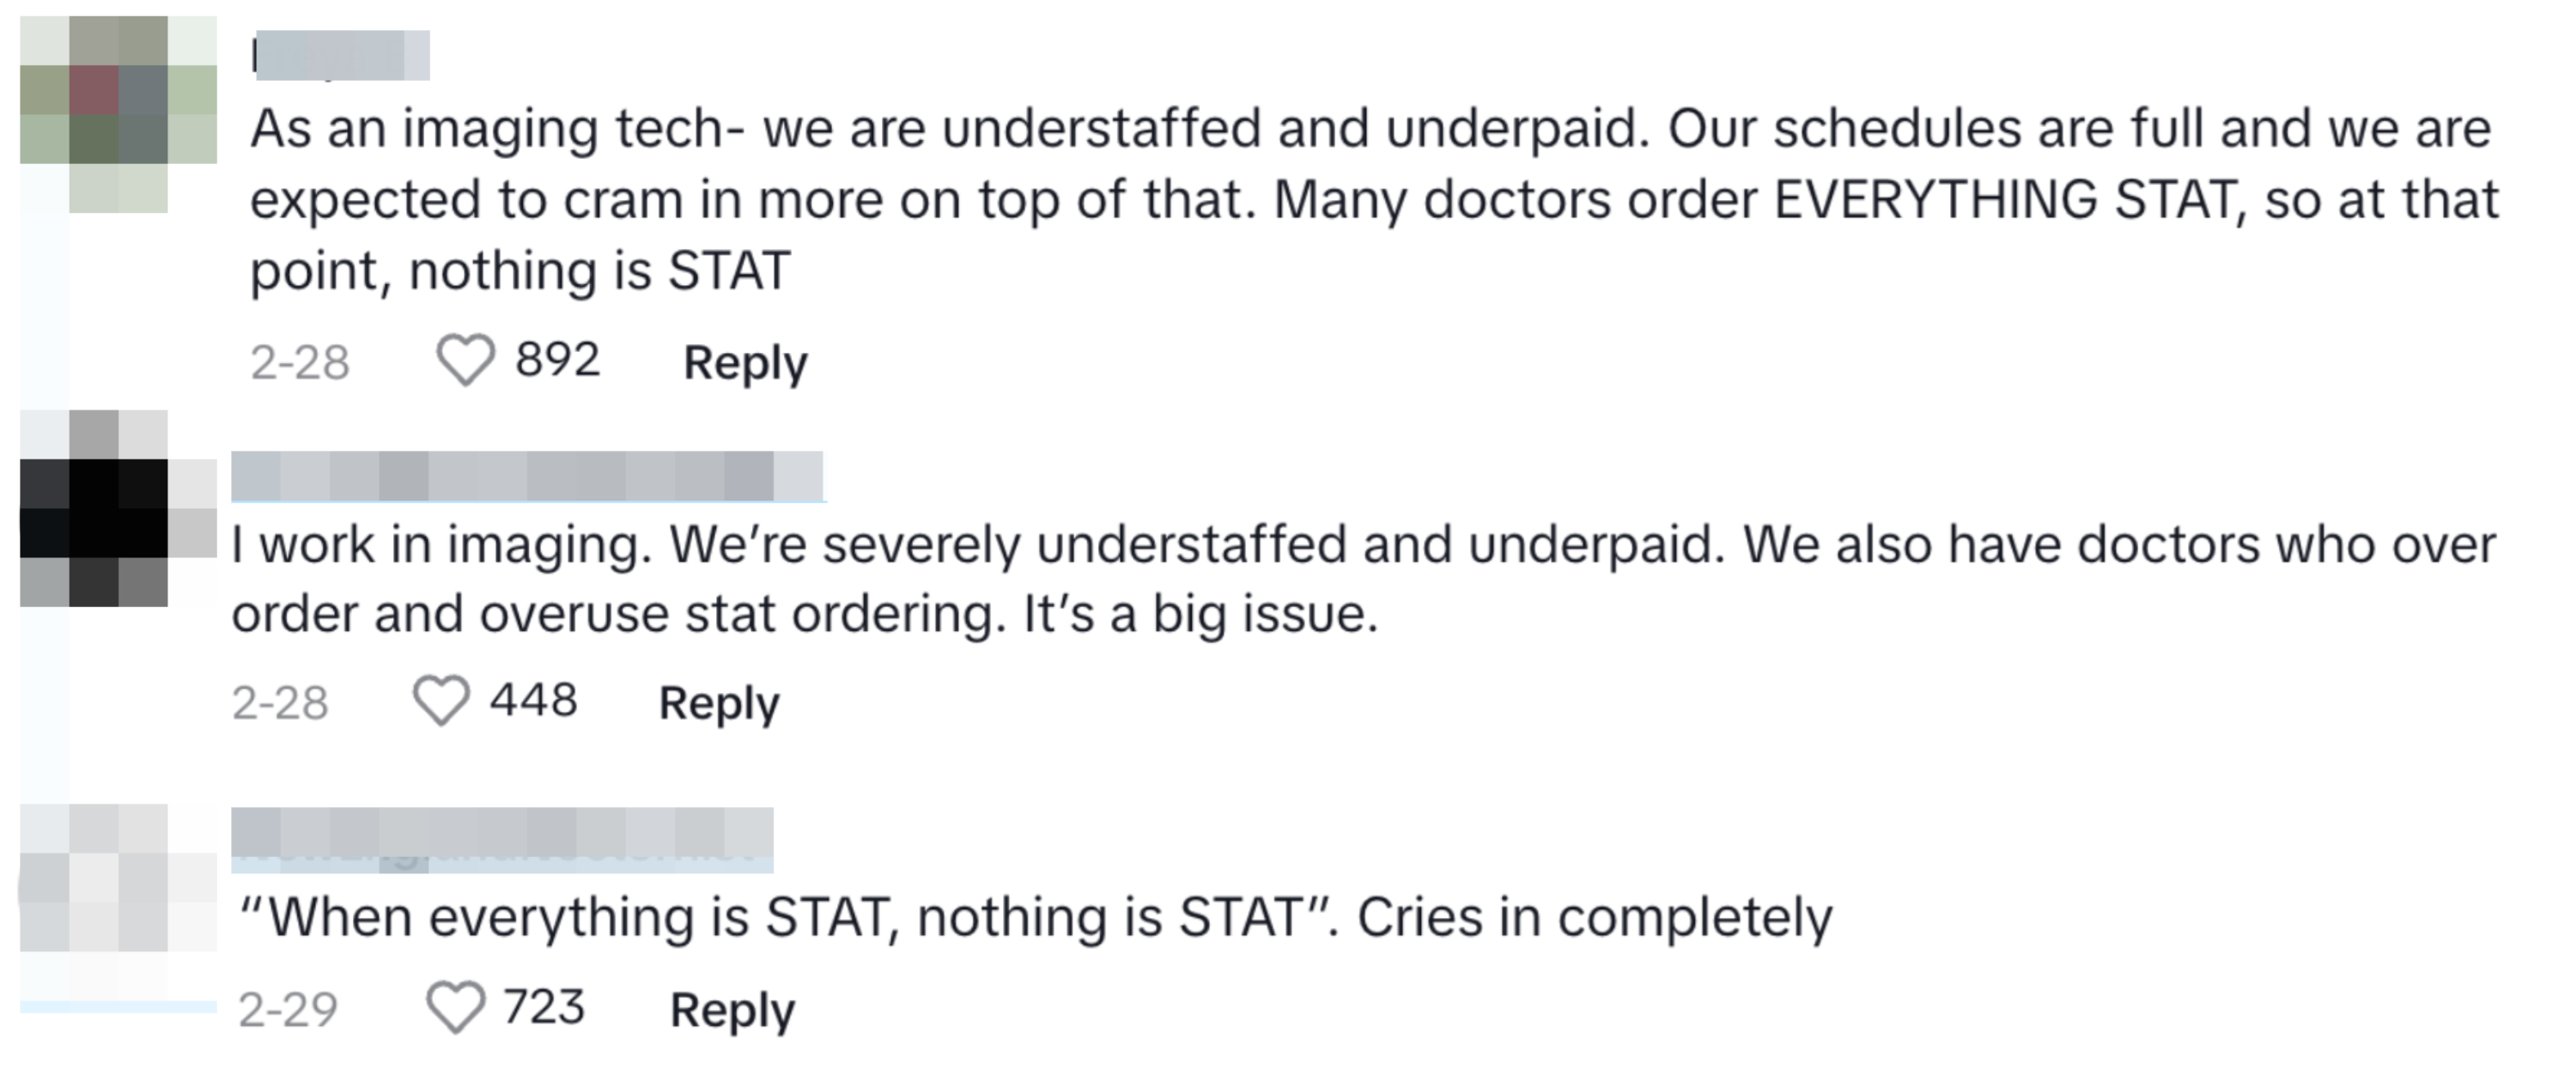 Image of three comments on under-staffing in medical imaging, discussing workloads and doctor ordering habits